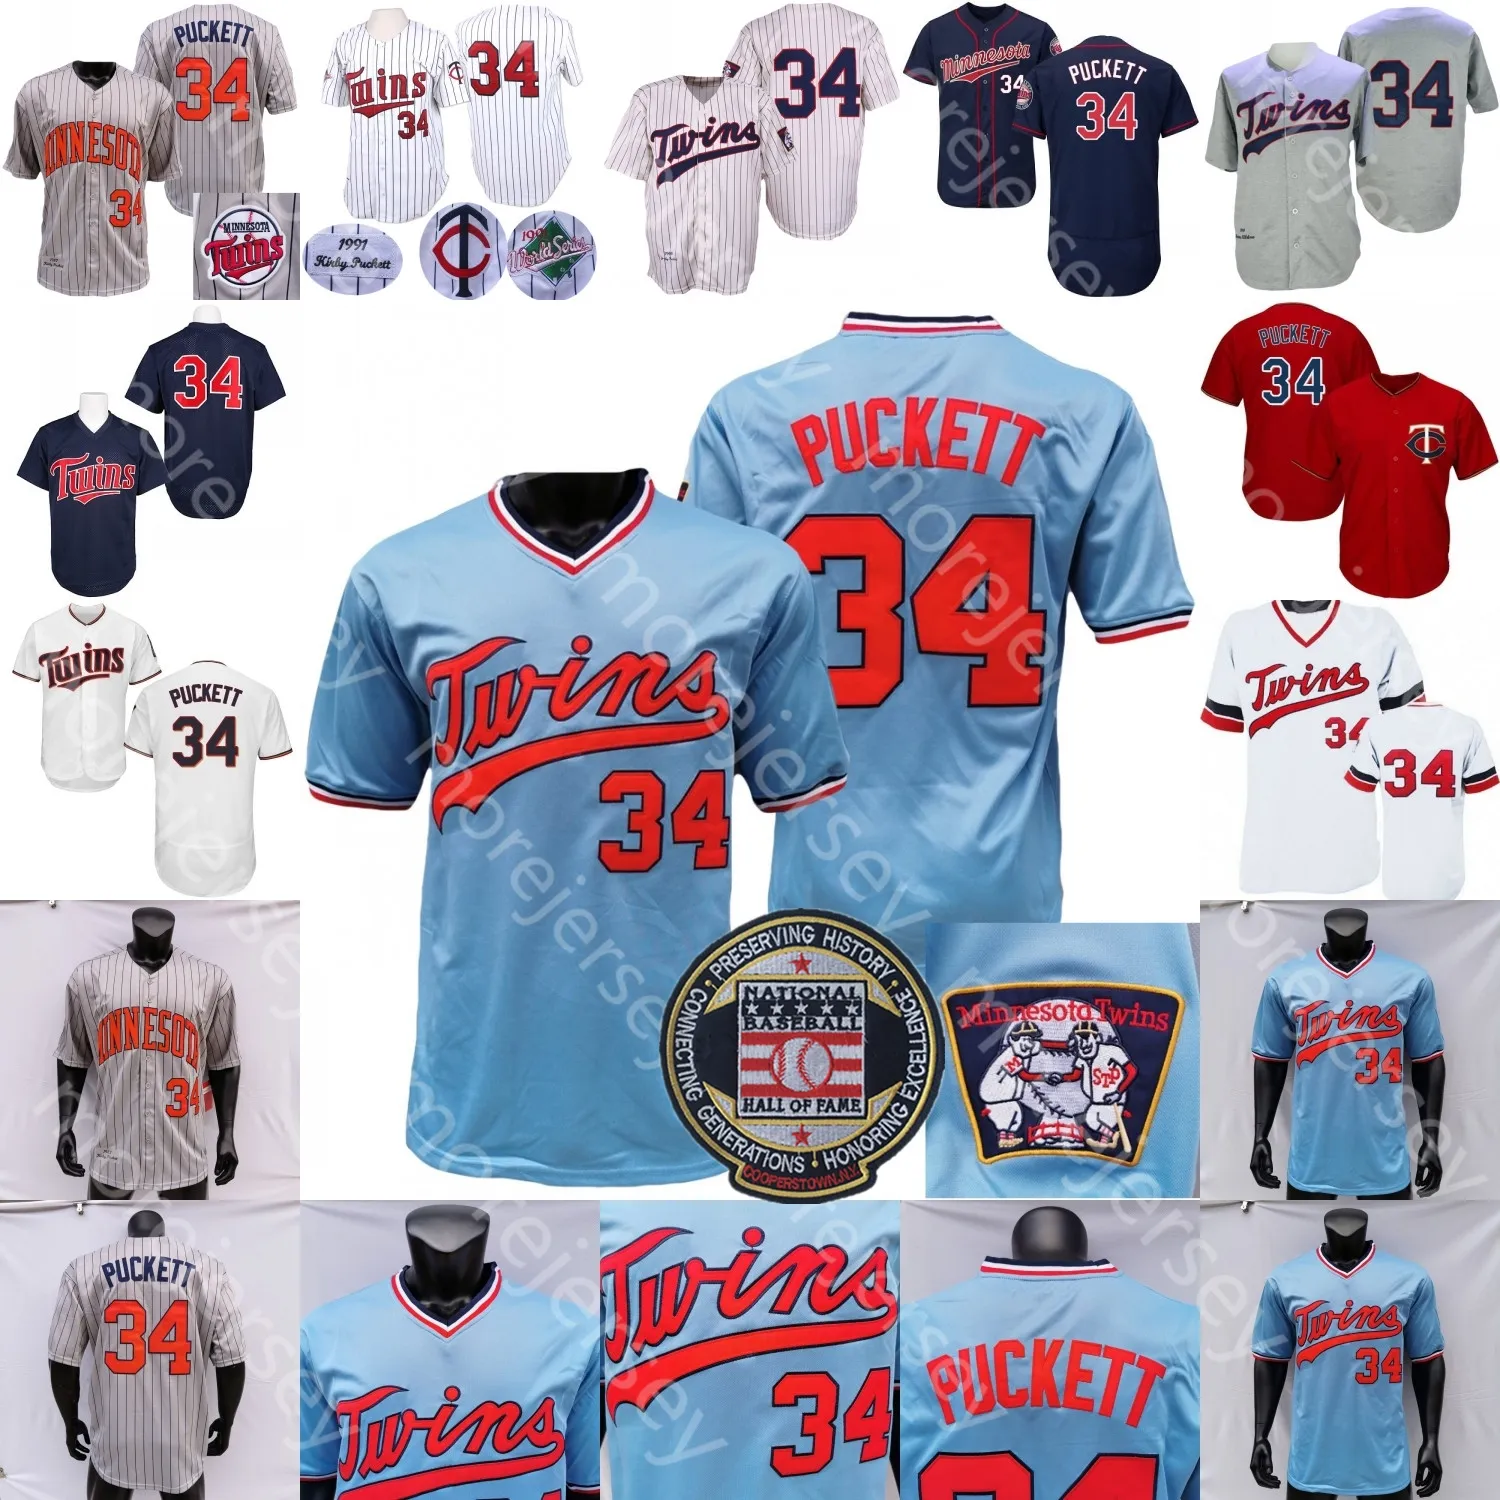 Kirby Puckett Jersey Hall Of Fame Patch 1969 Creme White Pinstripe Grå Coopers-town Vit Röd Player Fans Blå Pullover Salute to Service Navy Mesh BP